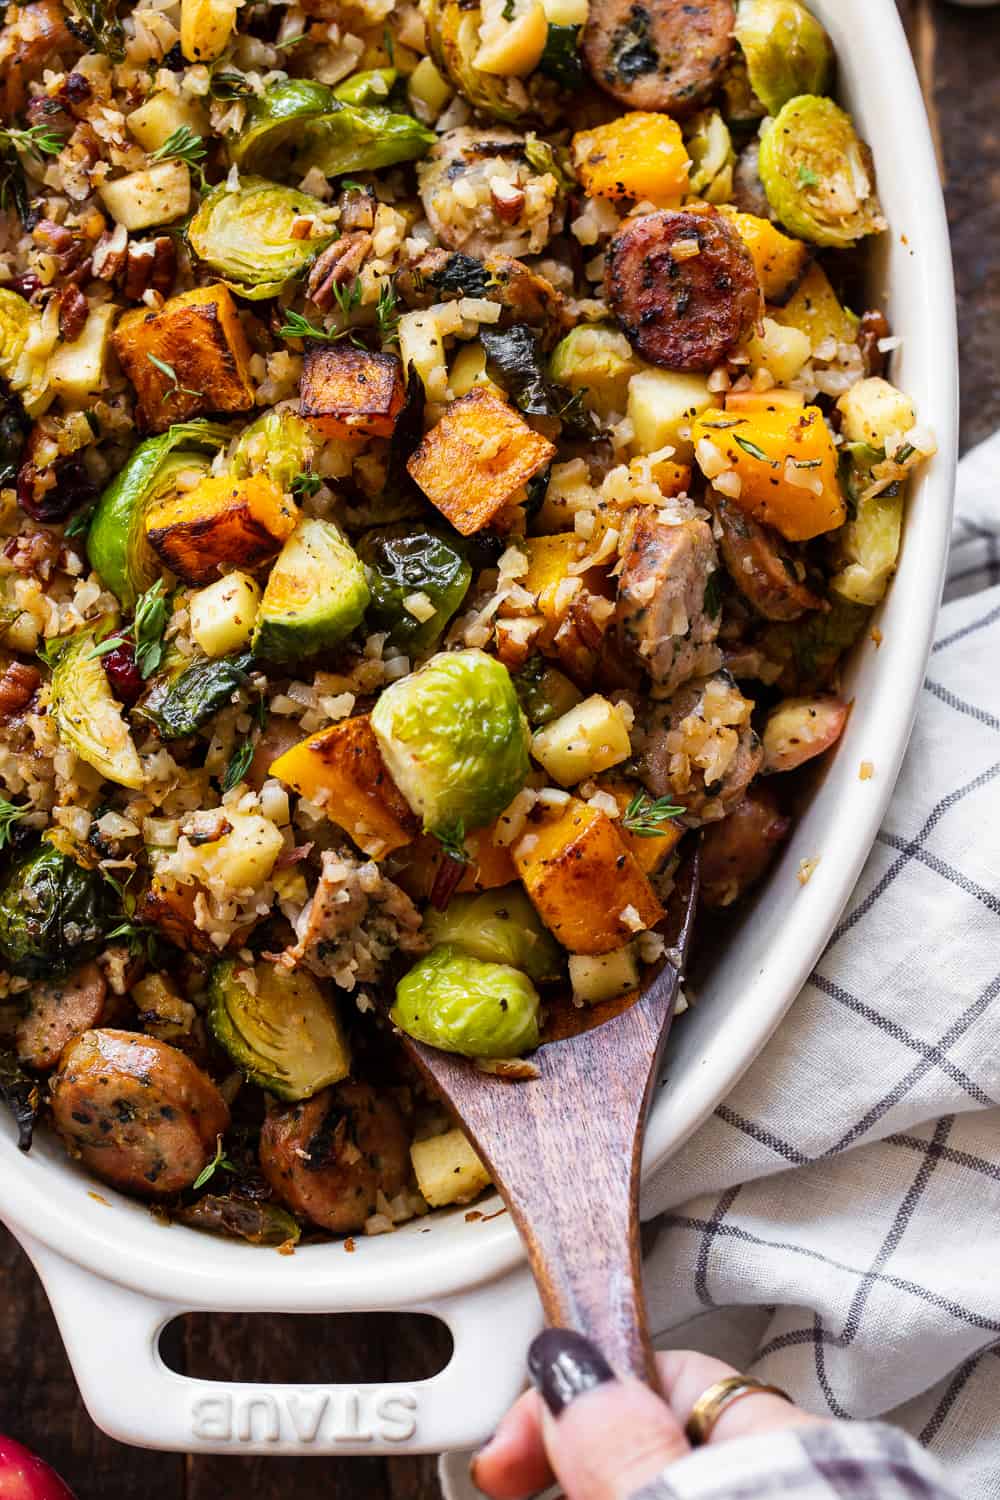 This savory and sweet harvest casserole is packed with veggies, protein, fresh herbs and all the best fall flavors! Serve it as a holiday side dish or a special seasonal meal. The leftovers are delicious for any meal! Paleo friendly, dairy free, Whole30. #paleo #whole30 #cleaneating 